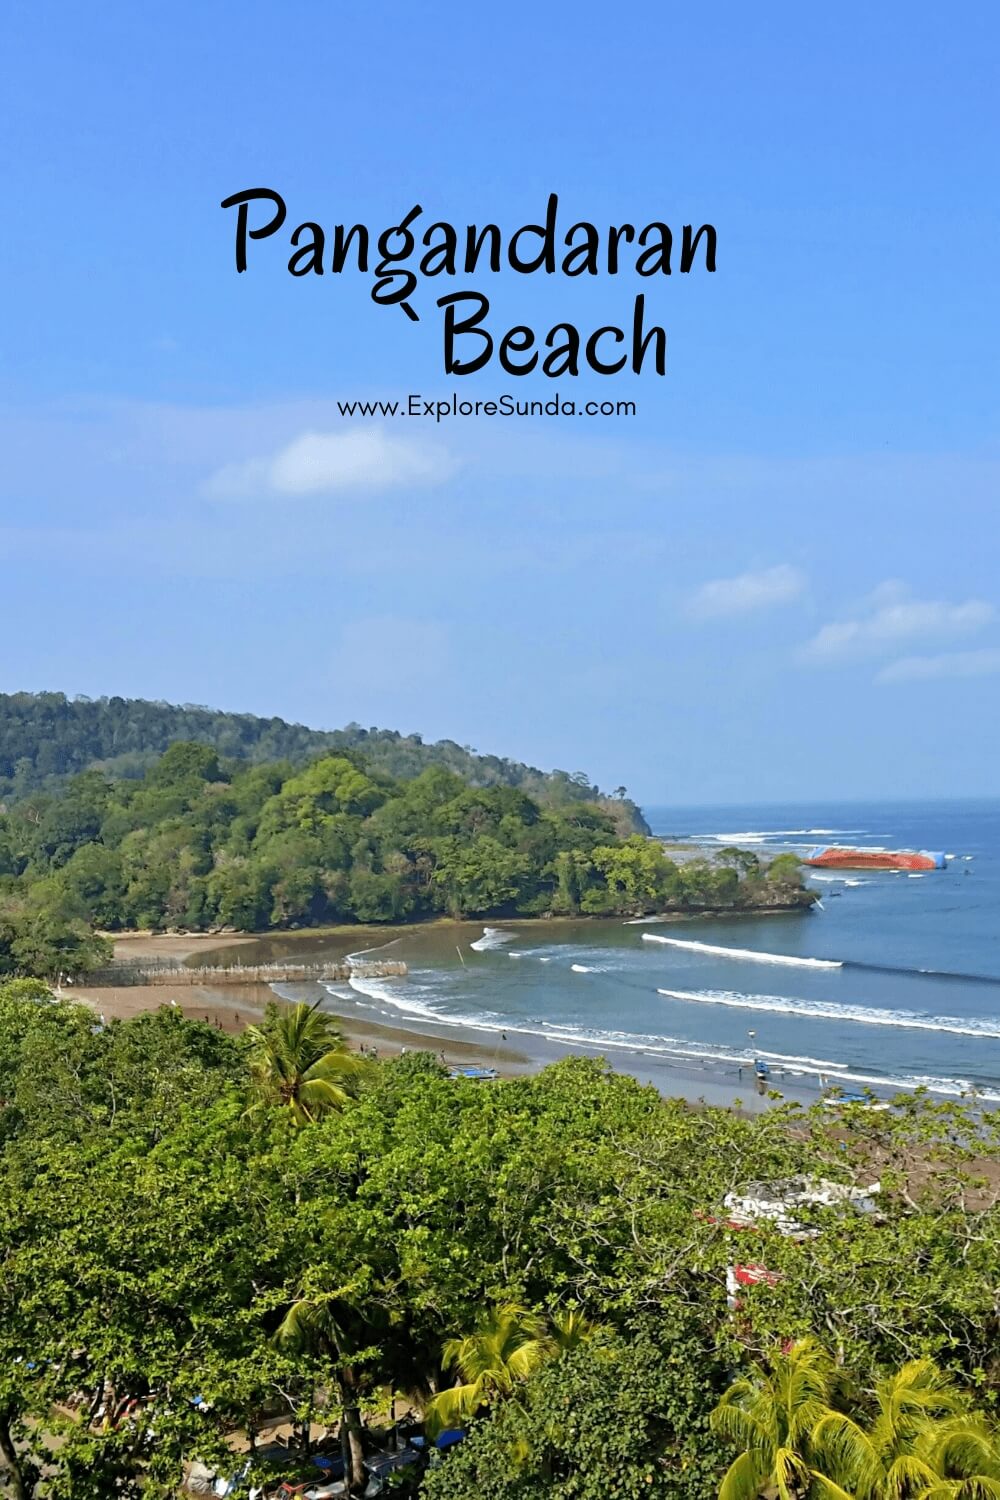 Things to do in Pangandaran Beach, the most favorite beach in West Java | Where the attractions are | What to eat | Where are the best hotels | #ExploreSunda #Pangandaran